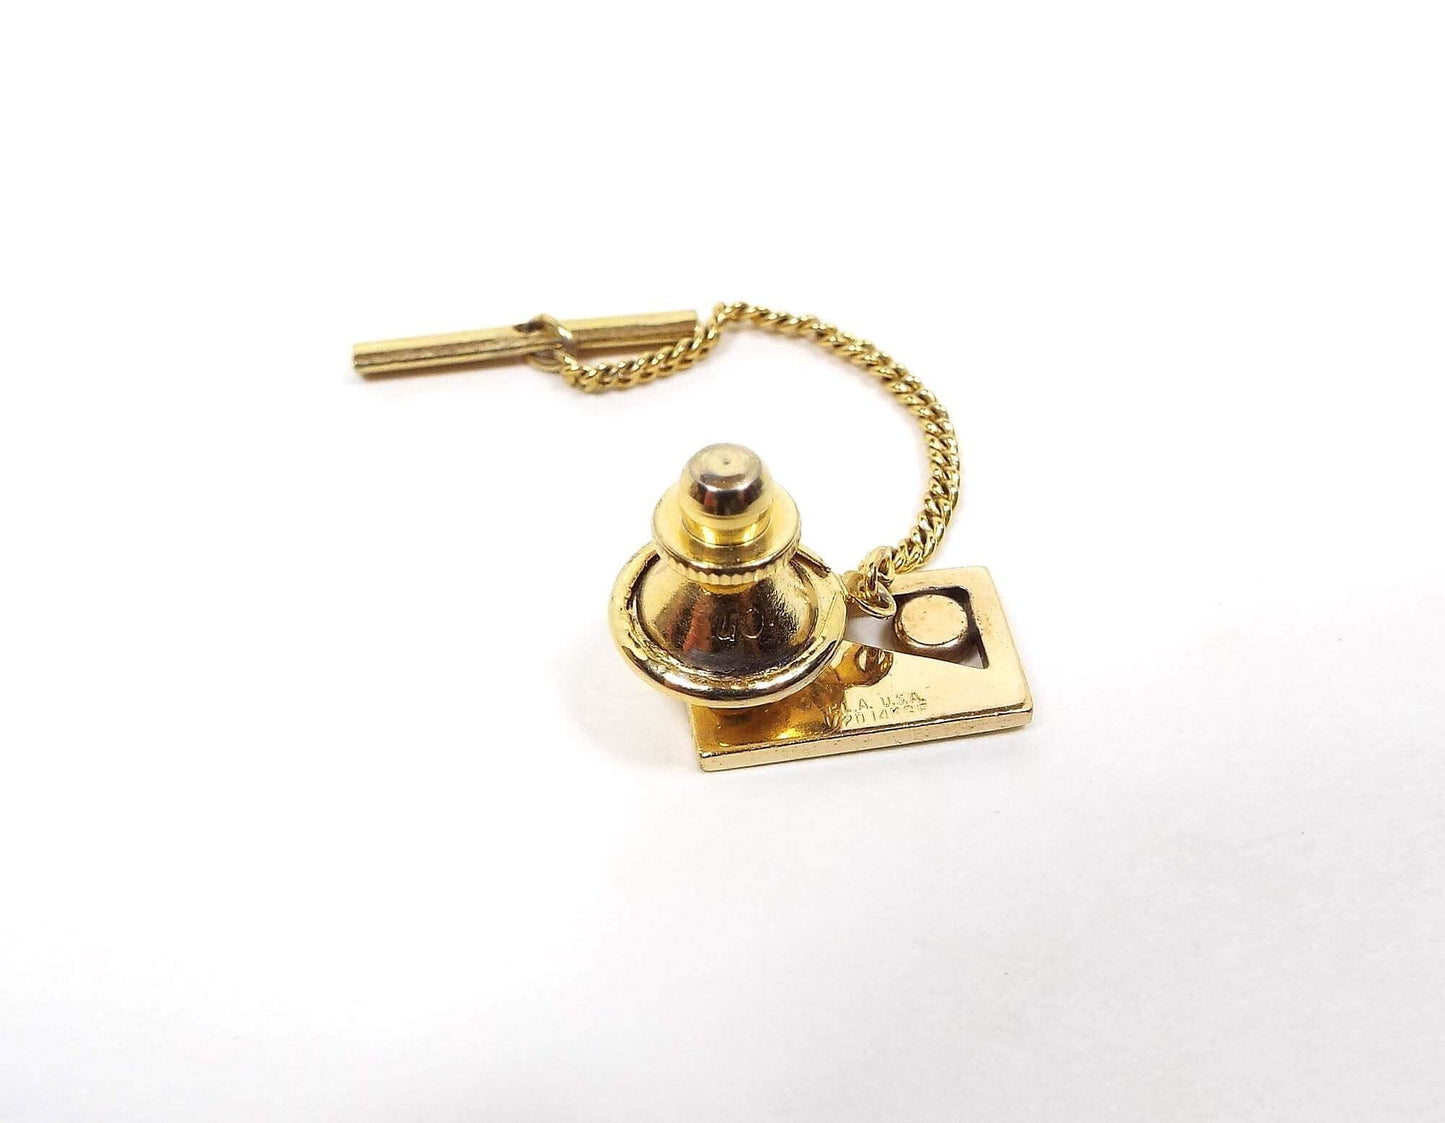 PLA Gold Filled Letter Initial H Vintage Tie Tack with Tiny Diamond Chip, 14K GF Tie Pin